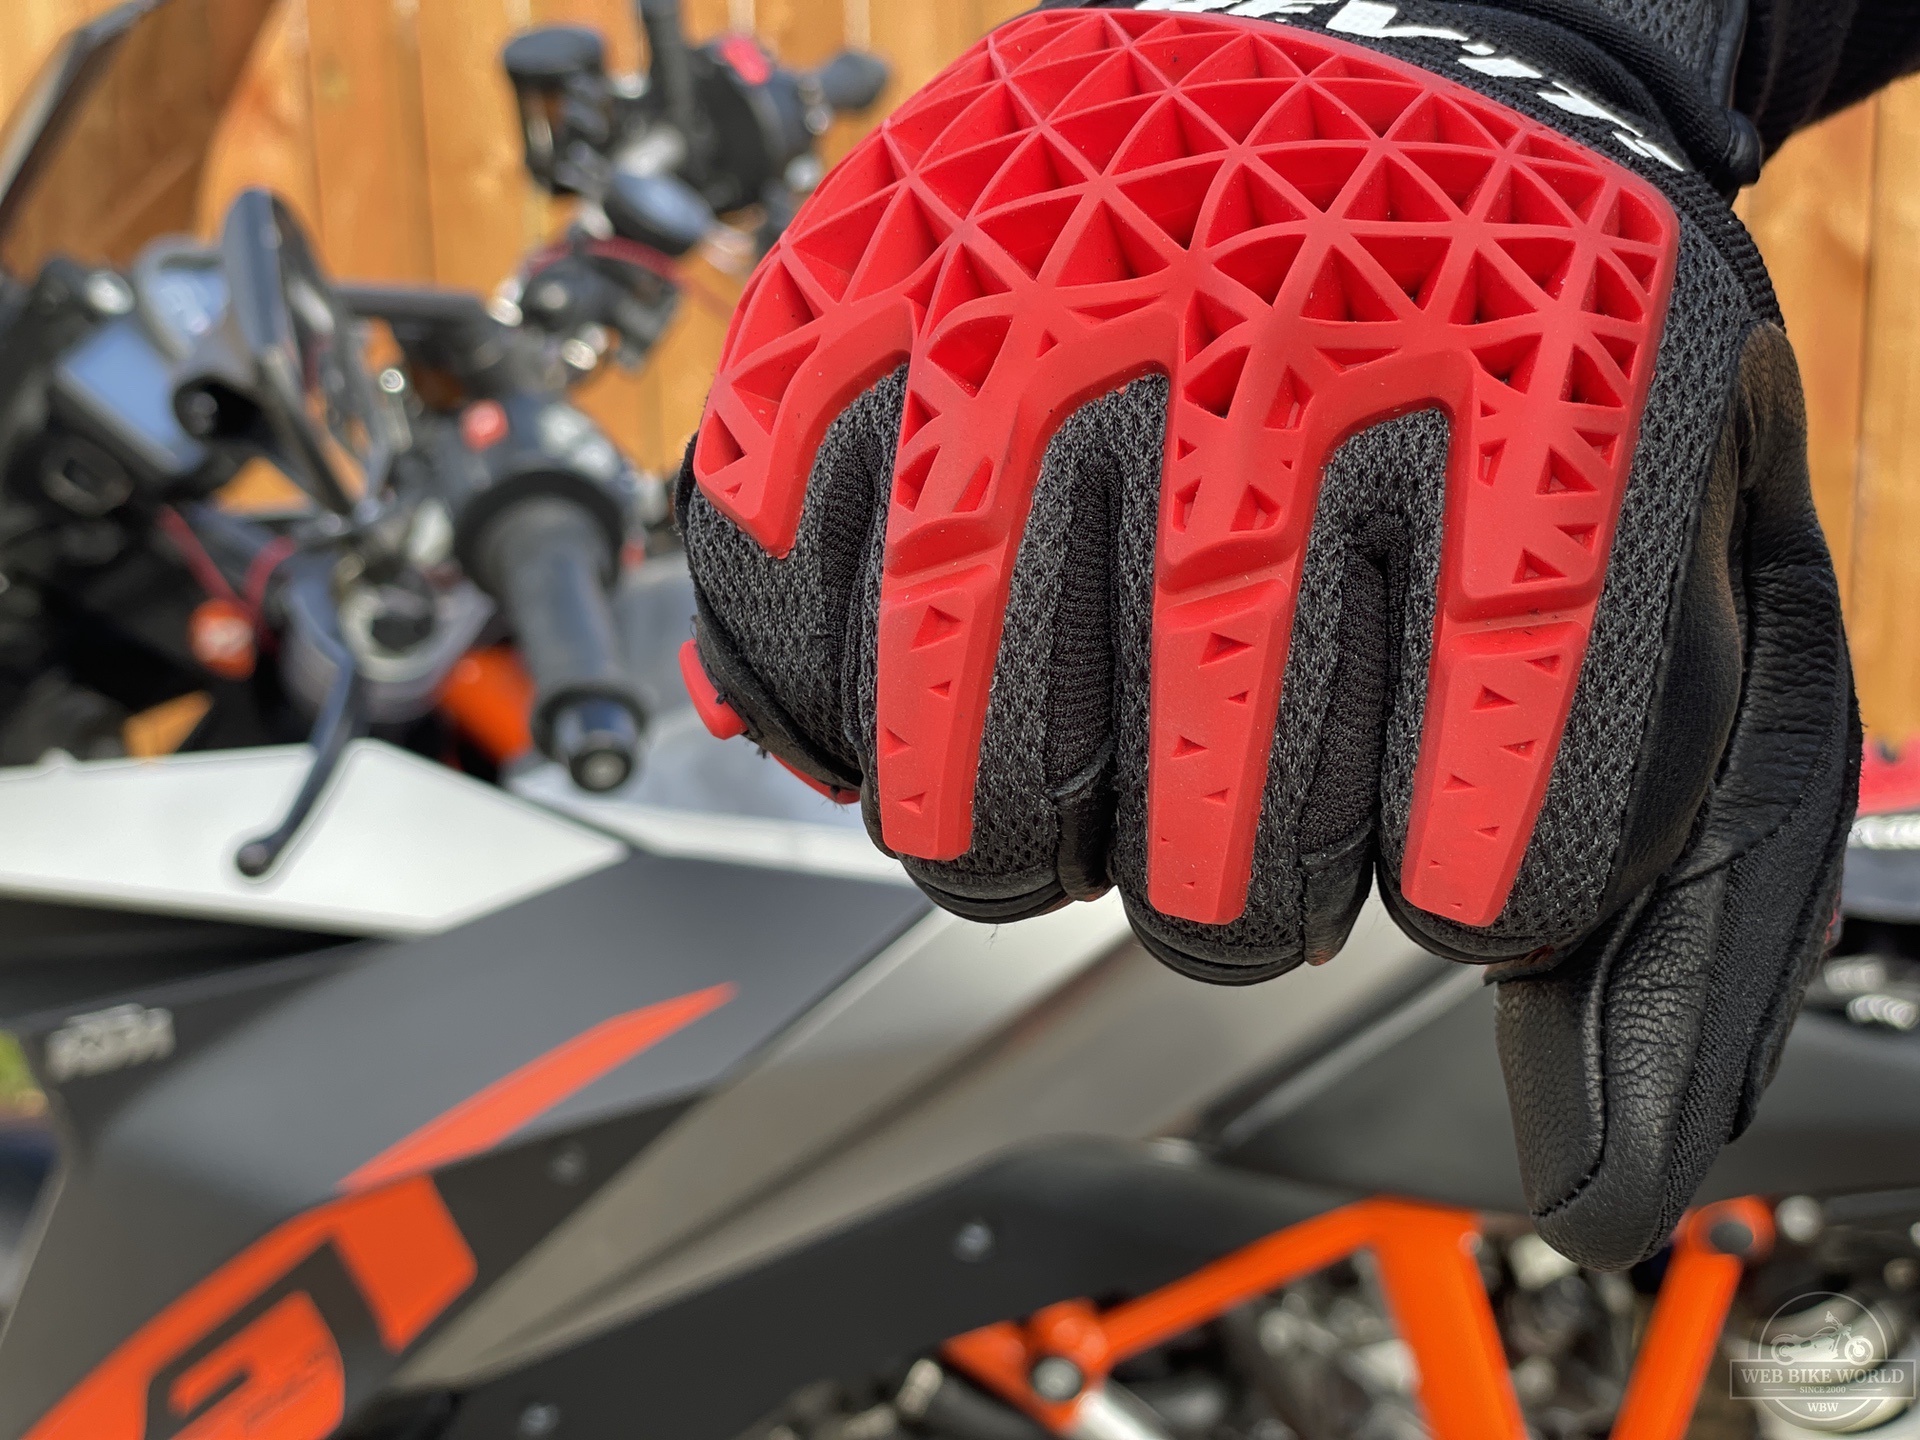 Close-up of red knuckle protectors on red and black REV'IT Sand 4 Gloves